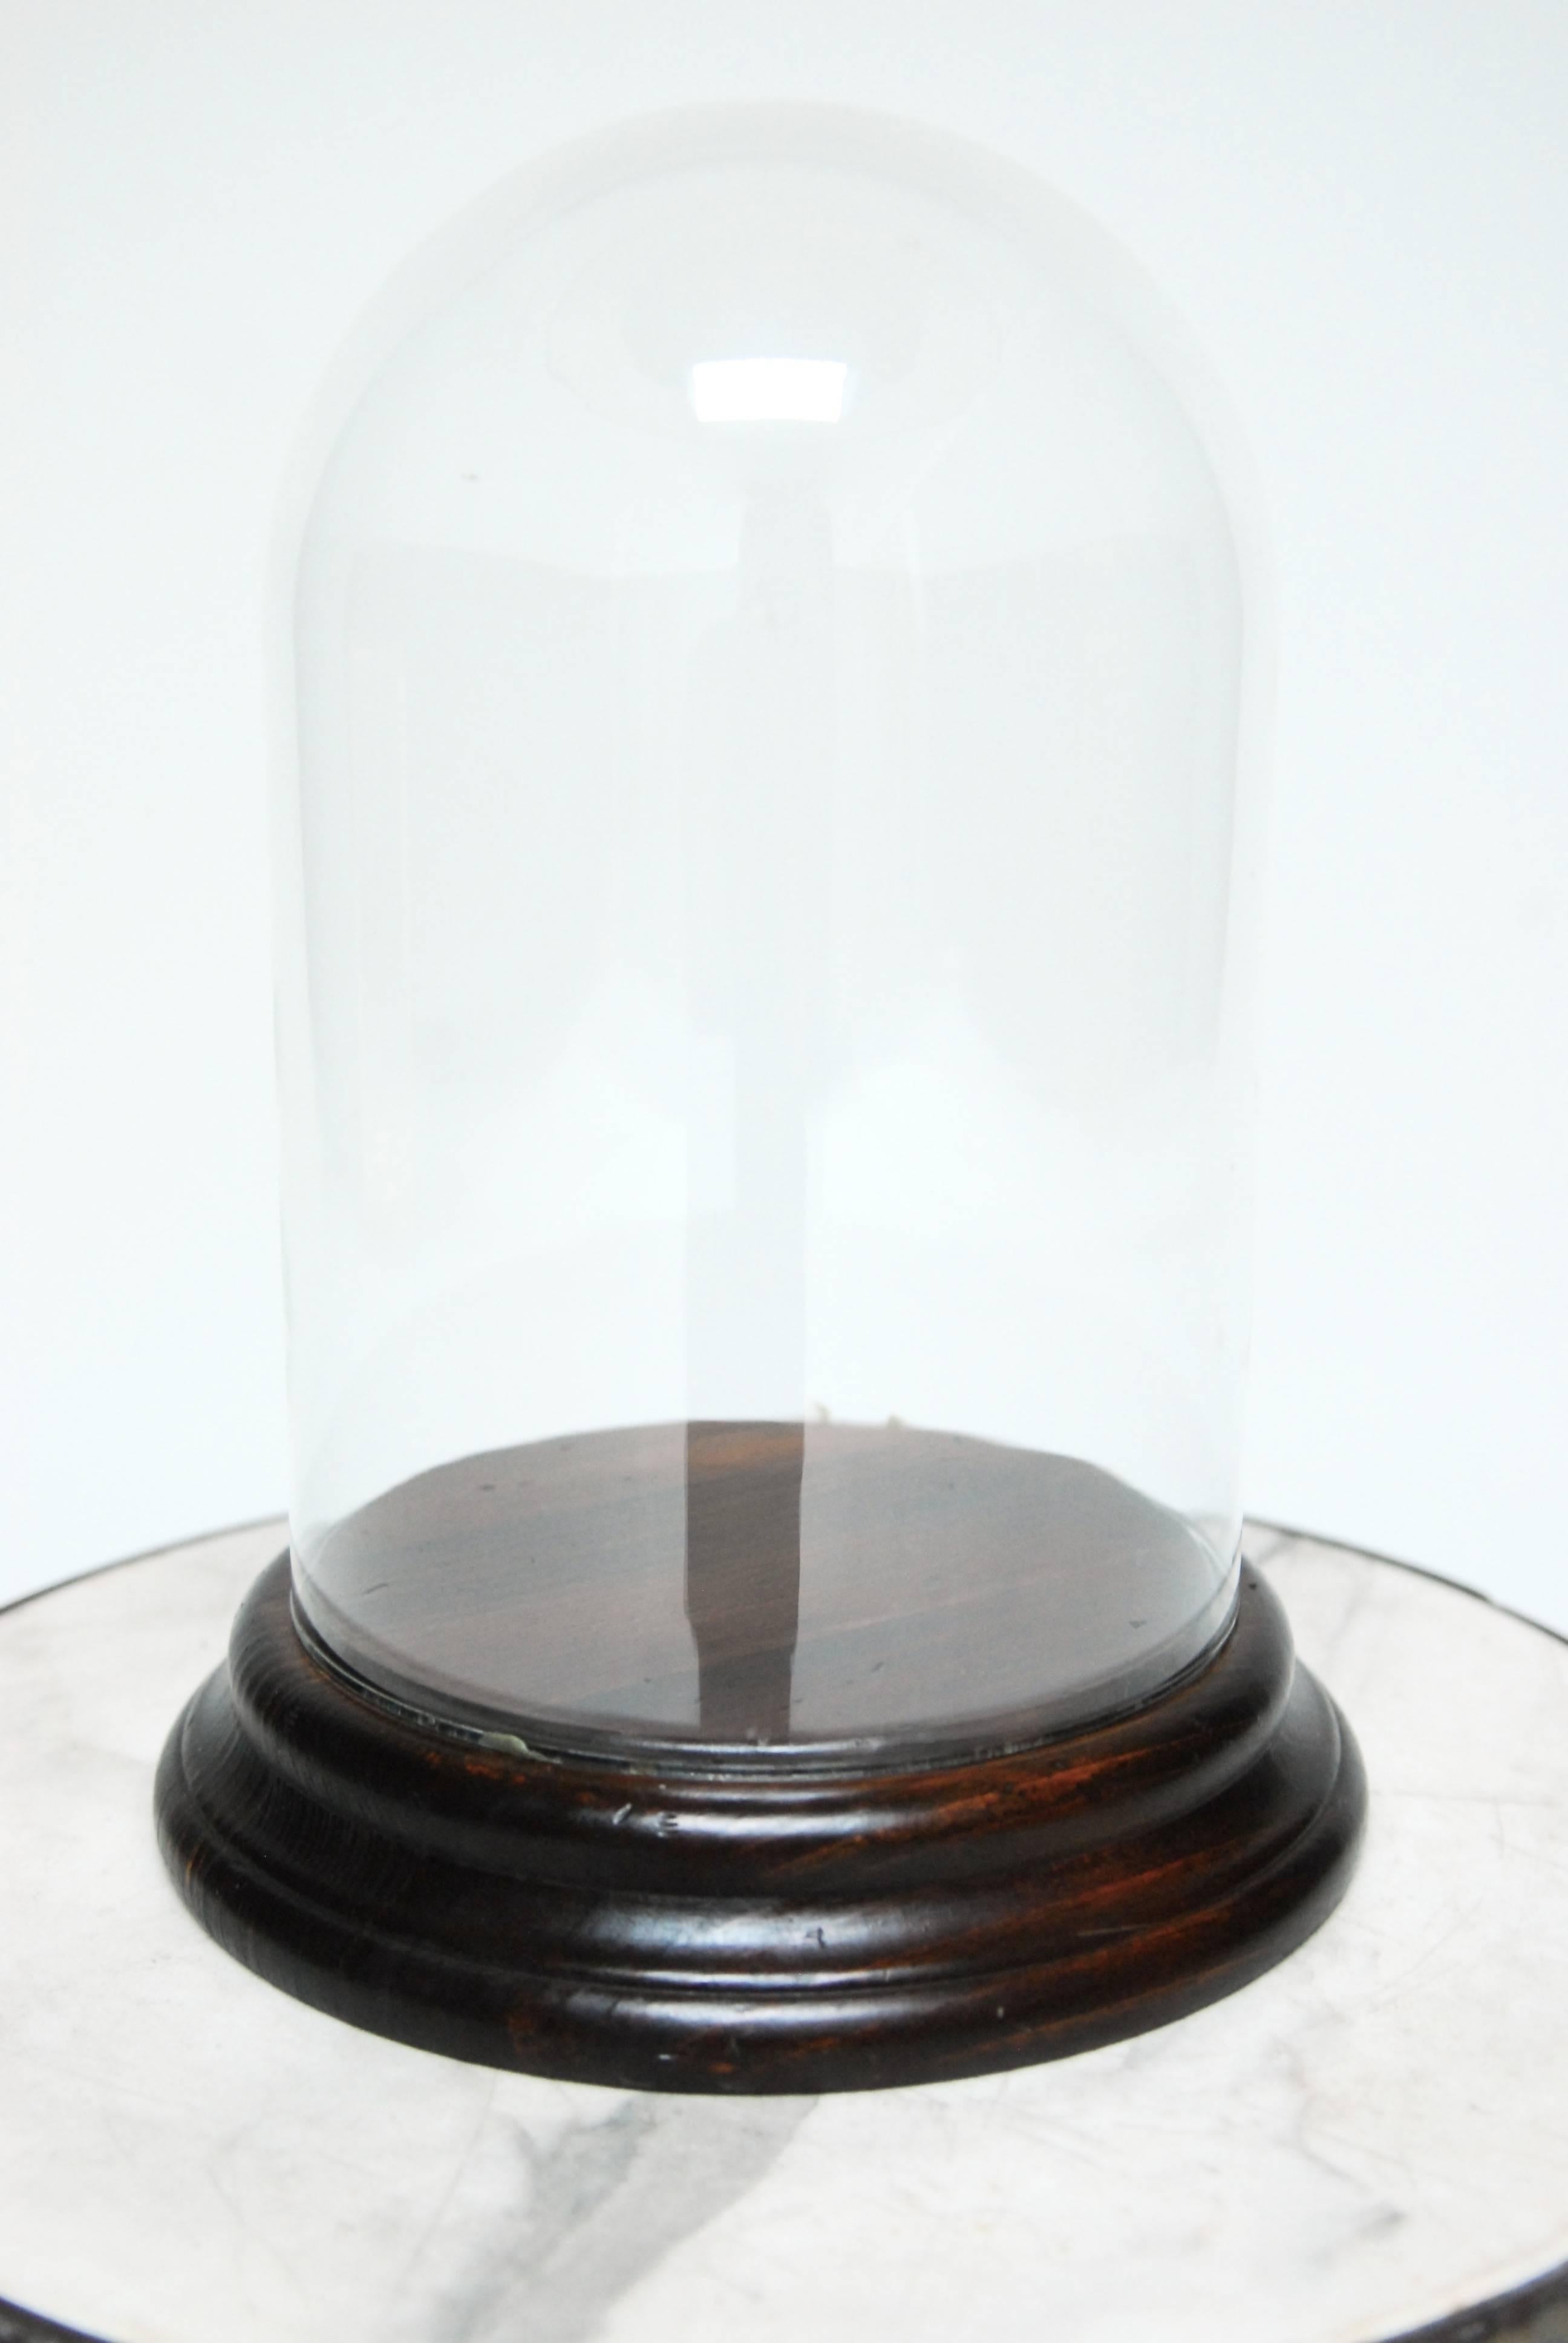 Large glass cloche dome bell jar atop a fitted mahogany wood base. Display your curiosity or oddity under the dome for all to admire. Topiary not included.